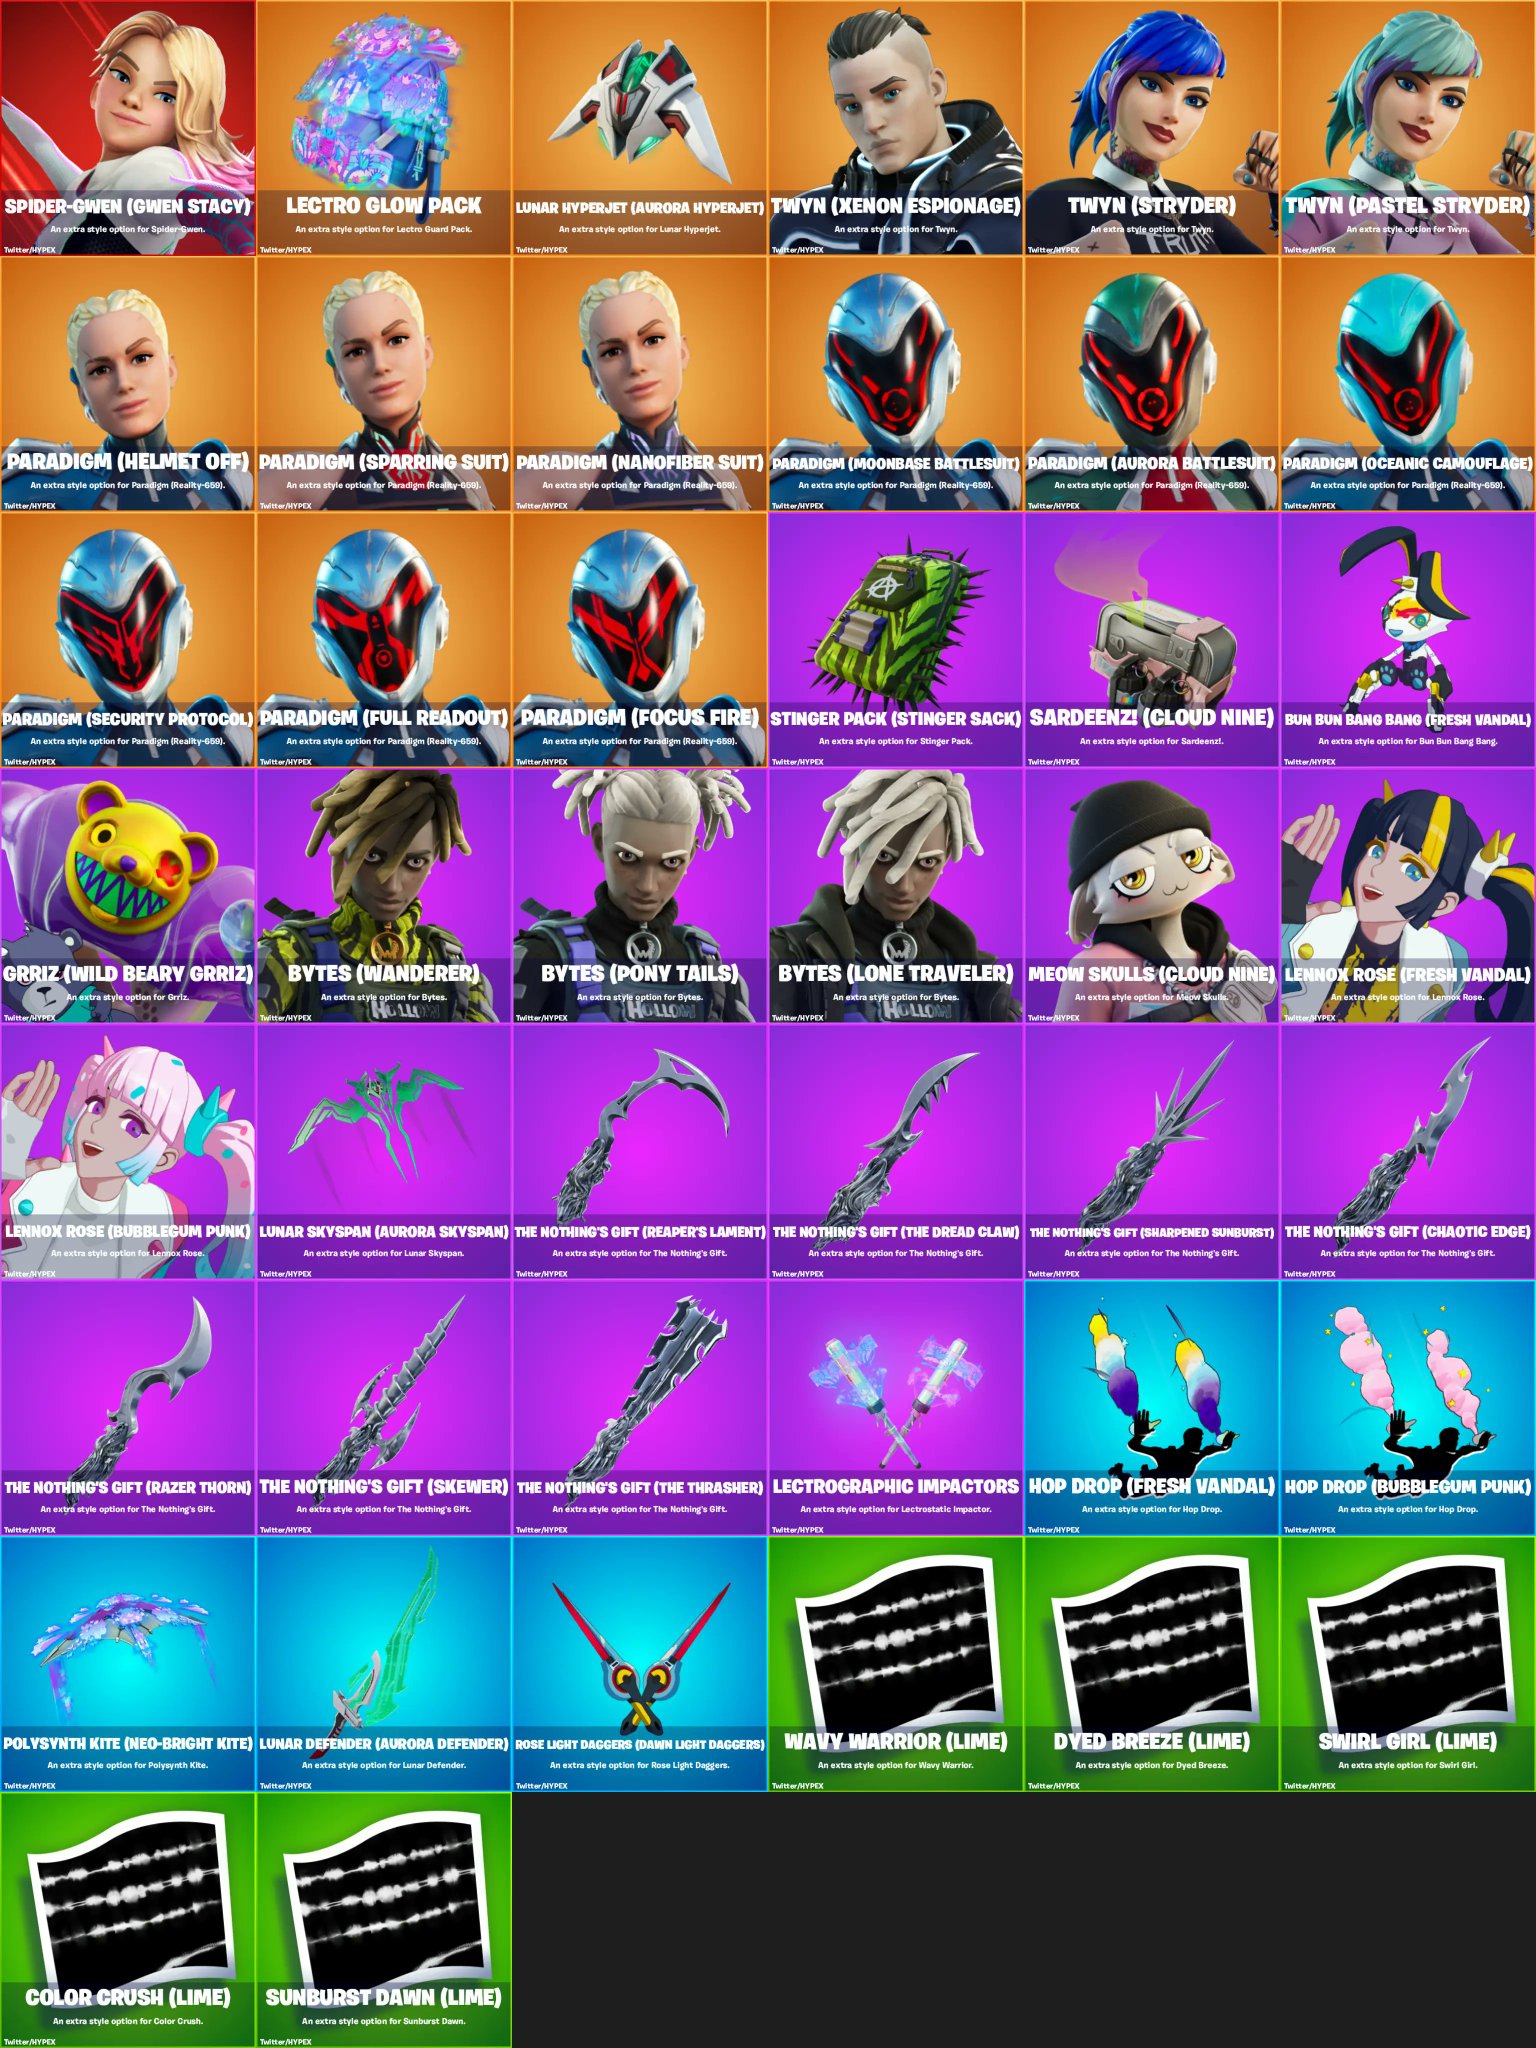 Dyed Breeze Fortnite Wallpapers